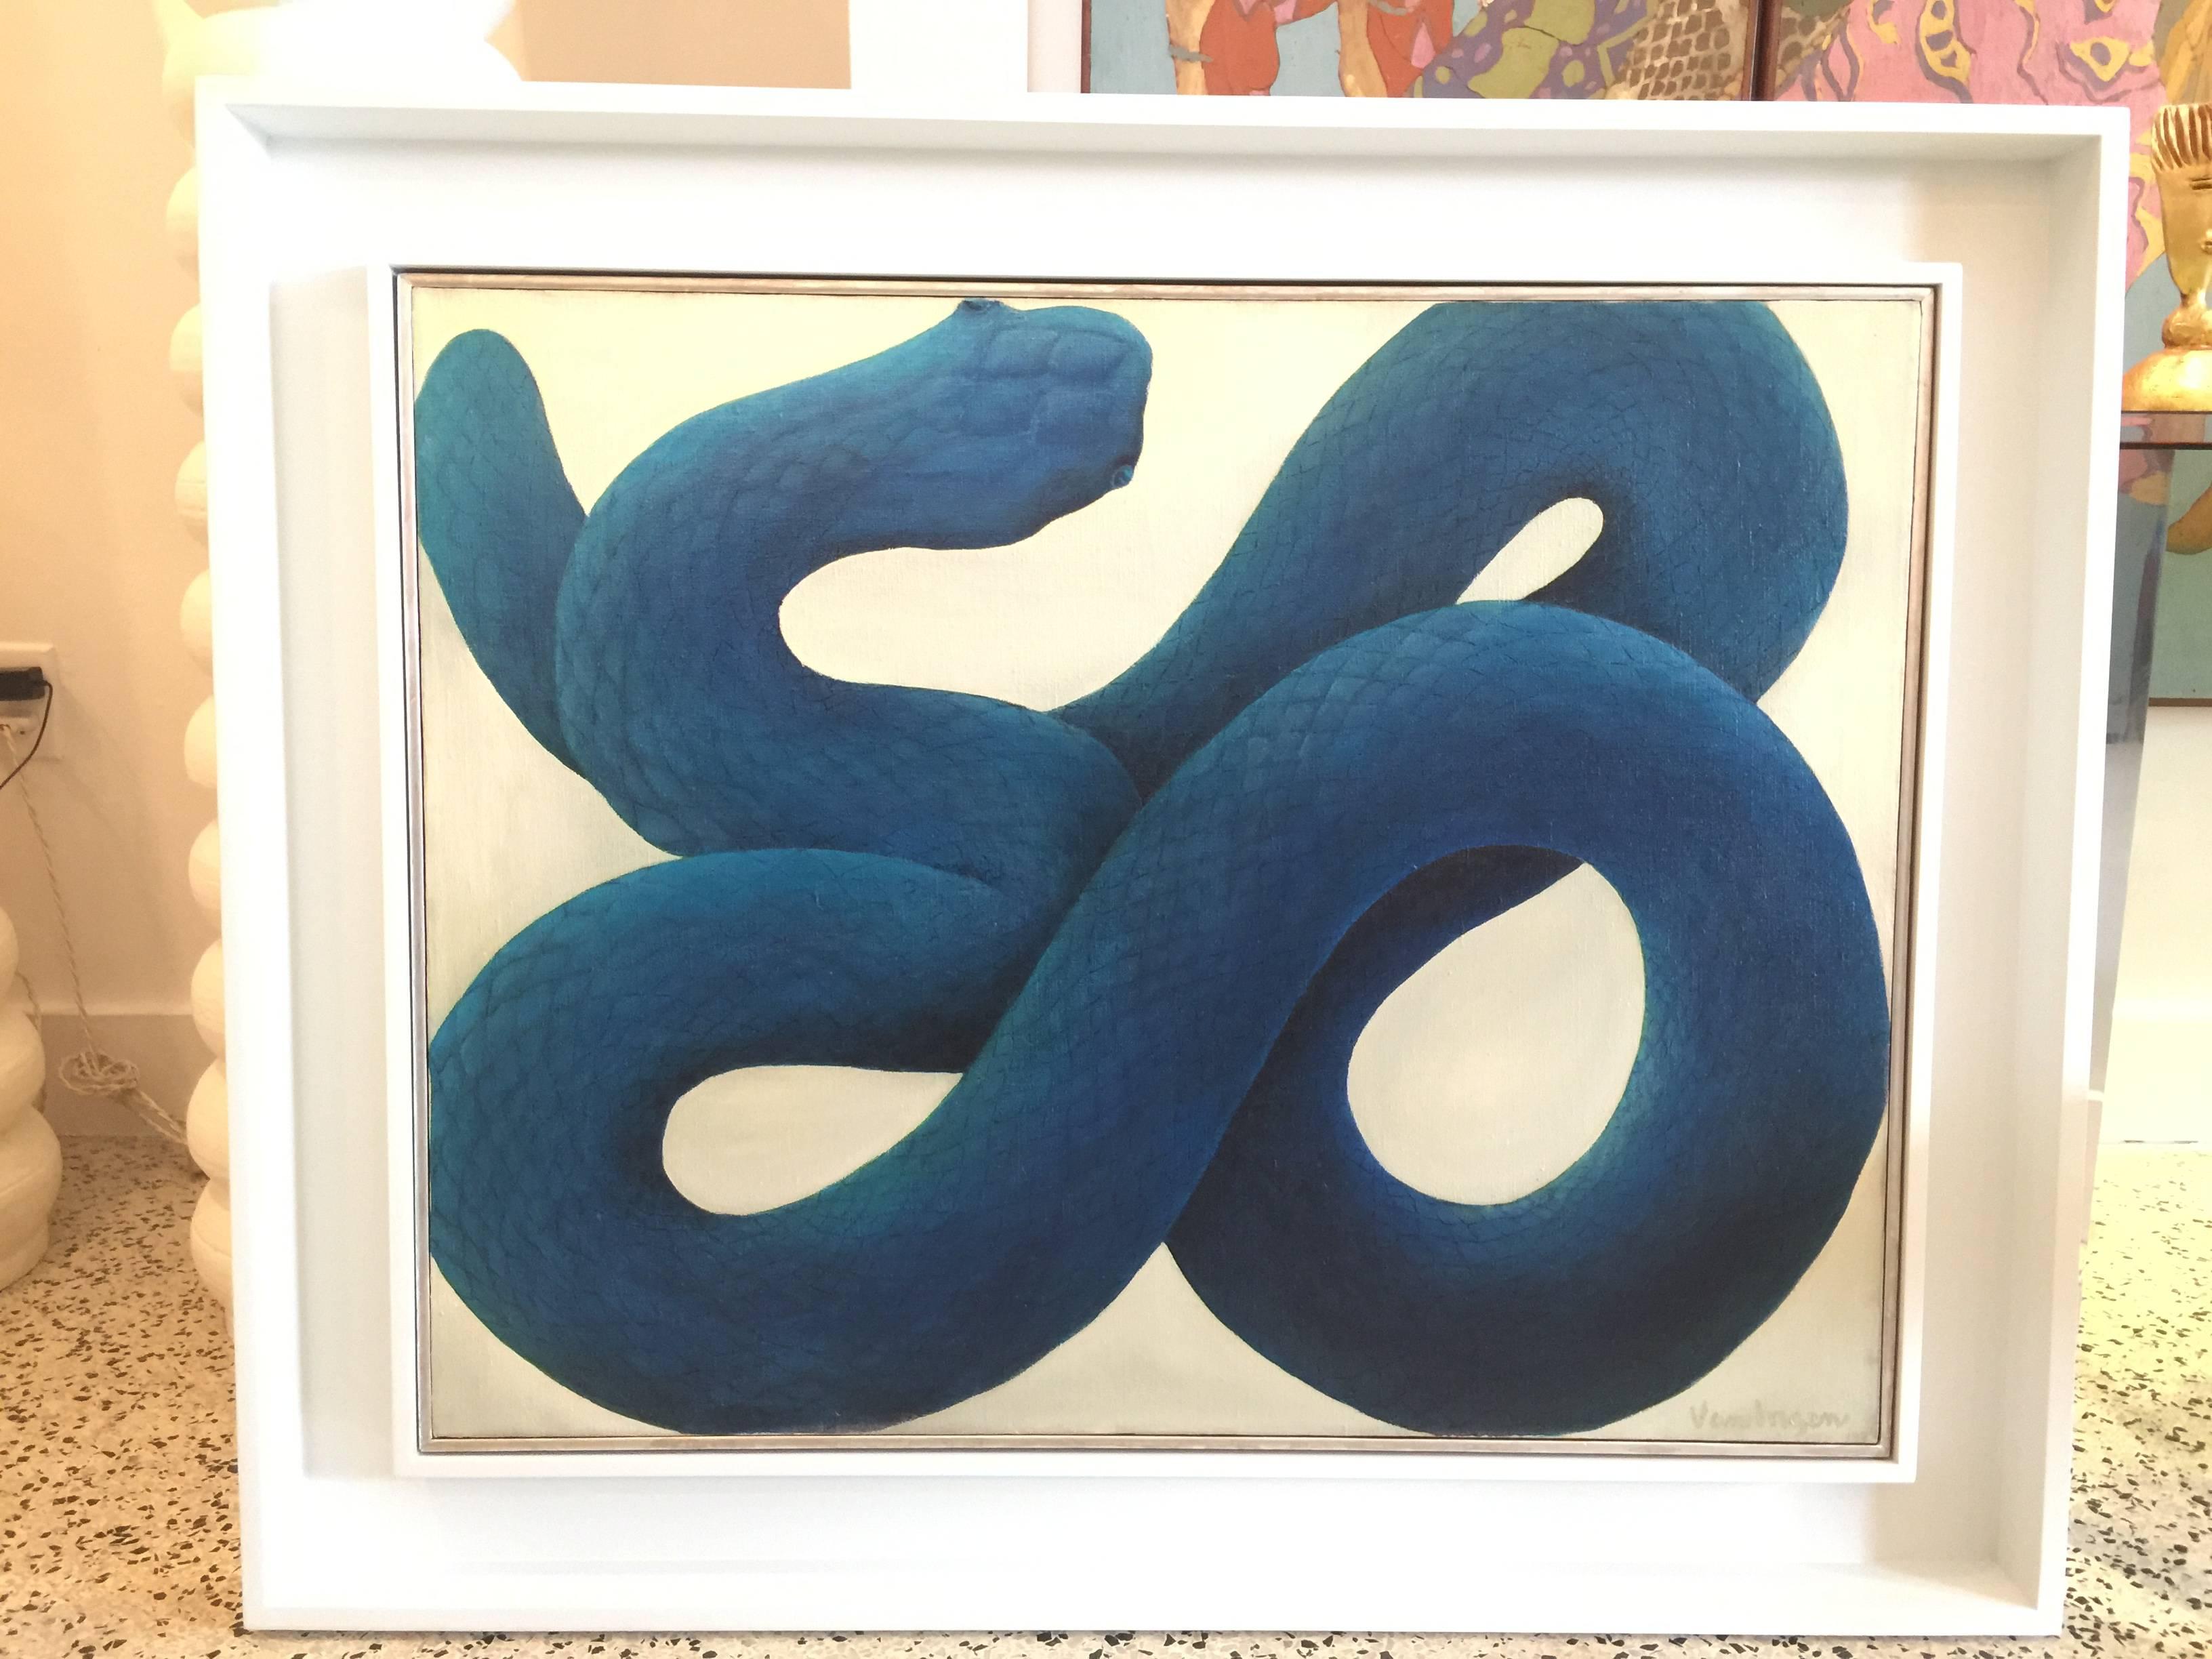 Phenomenal technique, this serpent in blue painted by Van Lagen, 1970.